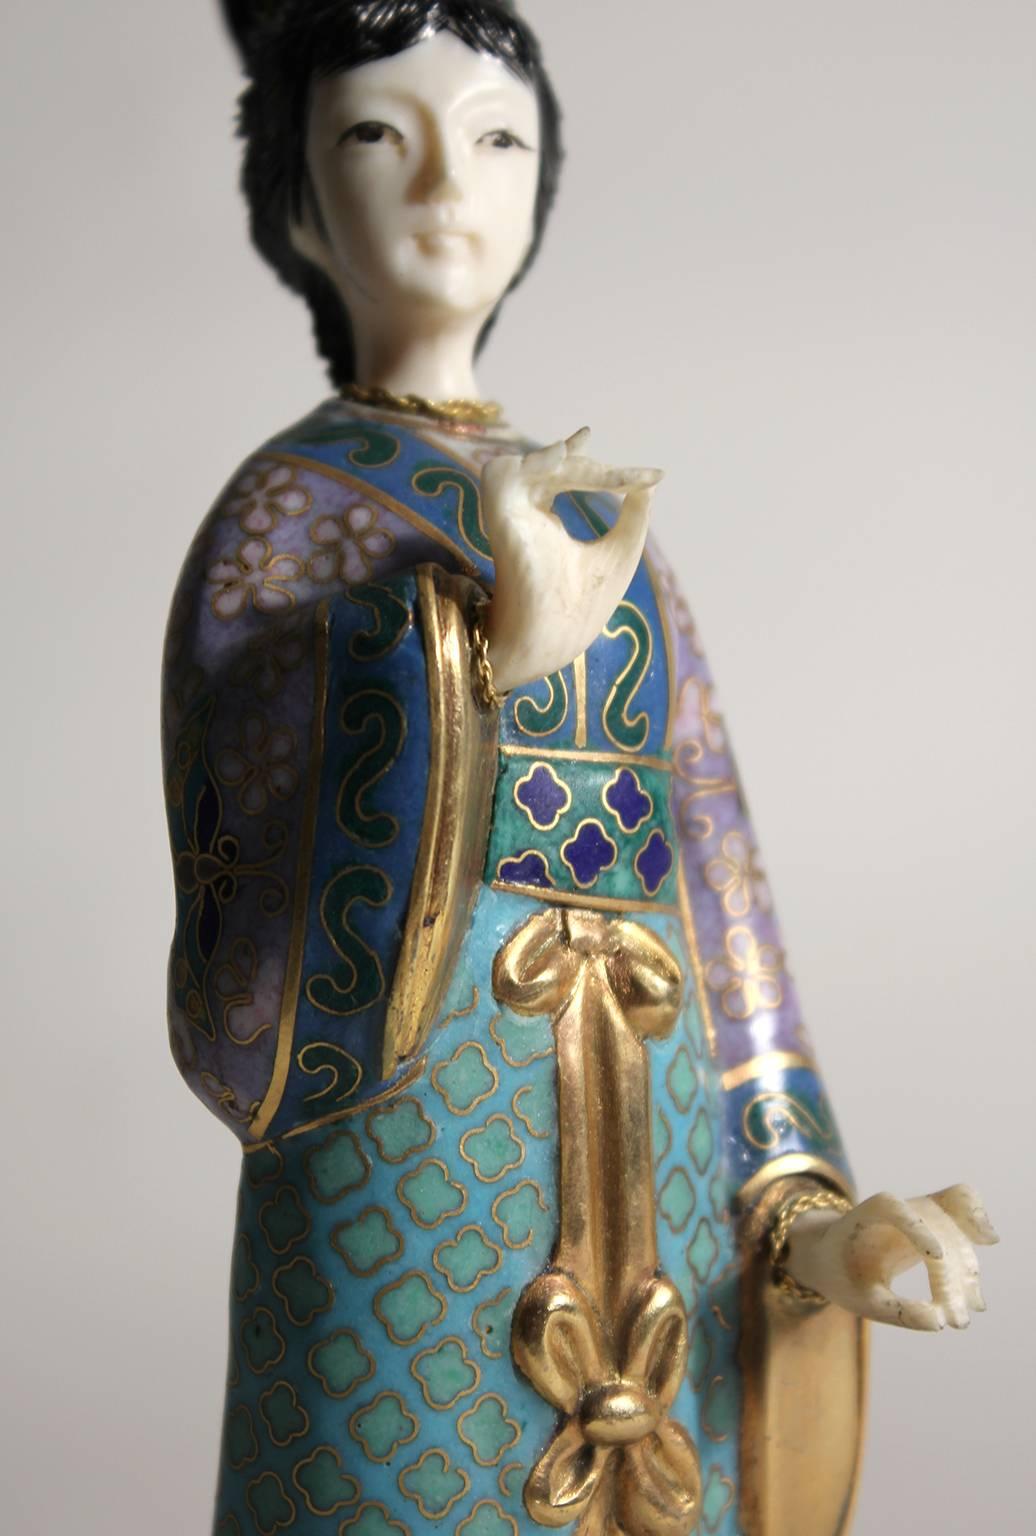 Antique Chinese Cloisonne Enameled Carved Guanyin Quan Yin Sculpture Figurine For Sale 1